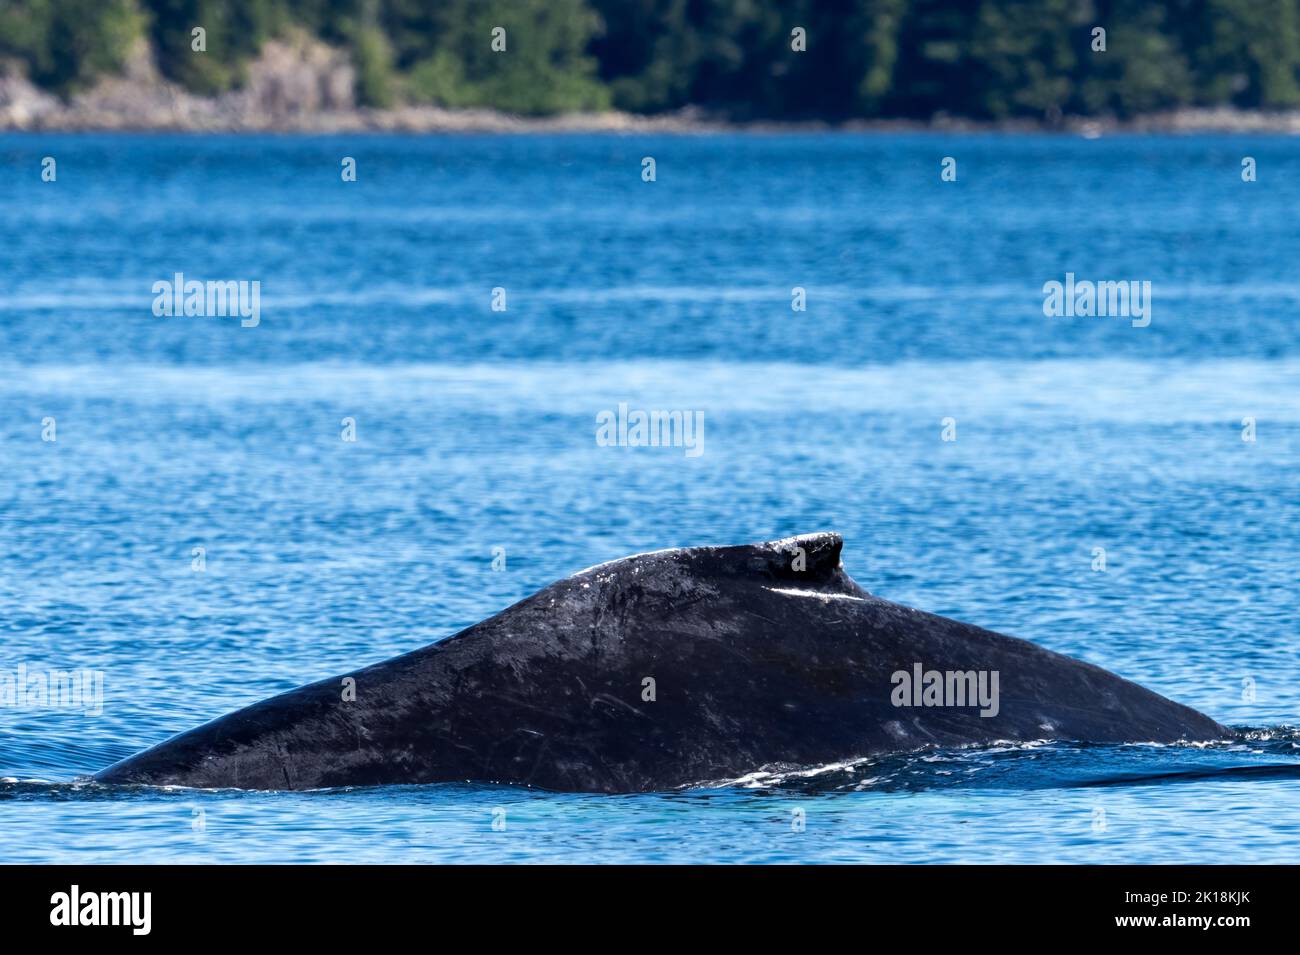 A Humpback whalein the blue ocean Stock Photo